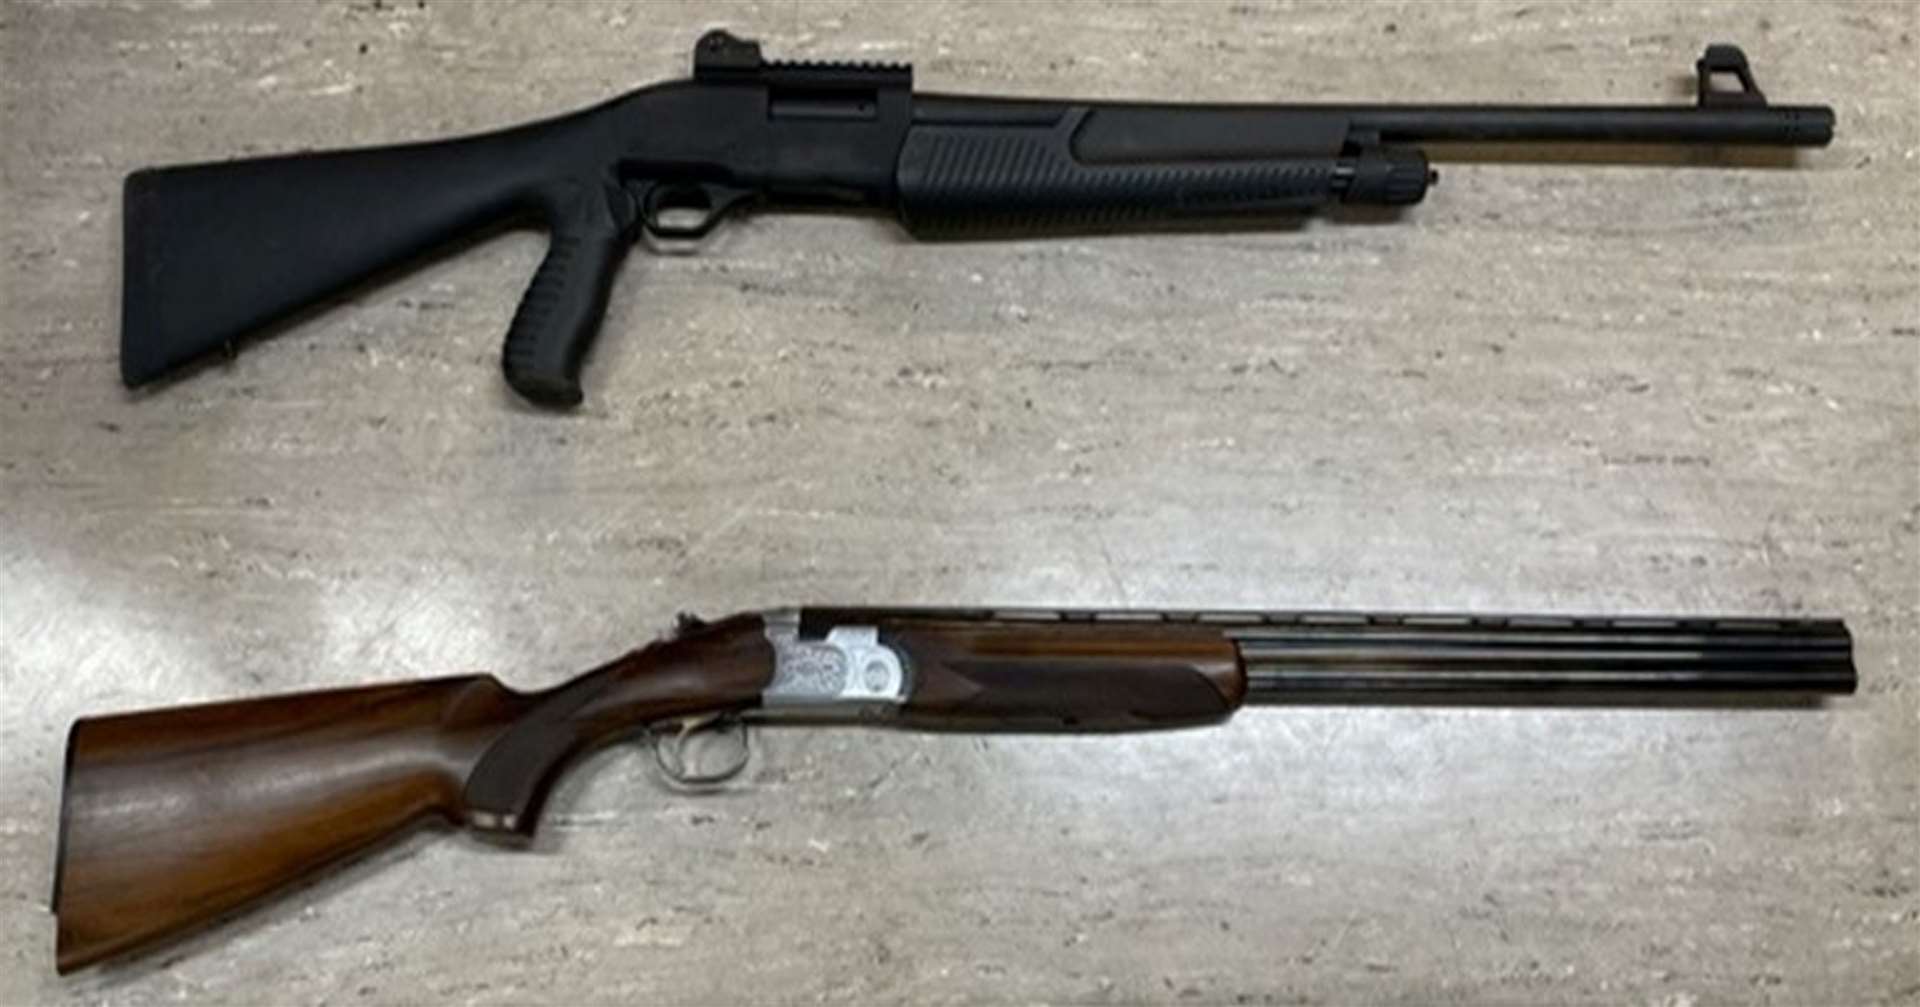 The Weatherby pump action shotgun, top, used by Jake Davison in the killings next to a standard sporting style 12-gauge shotgun (Plymouth HM Coroner/PA)